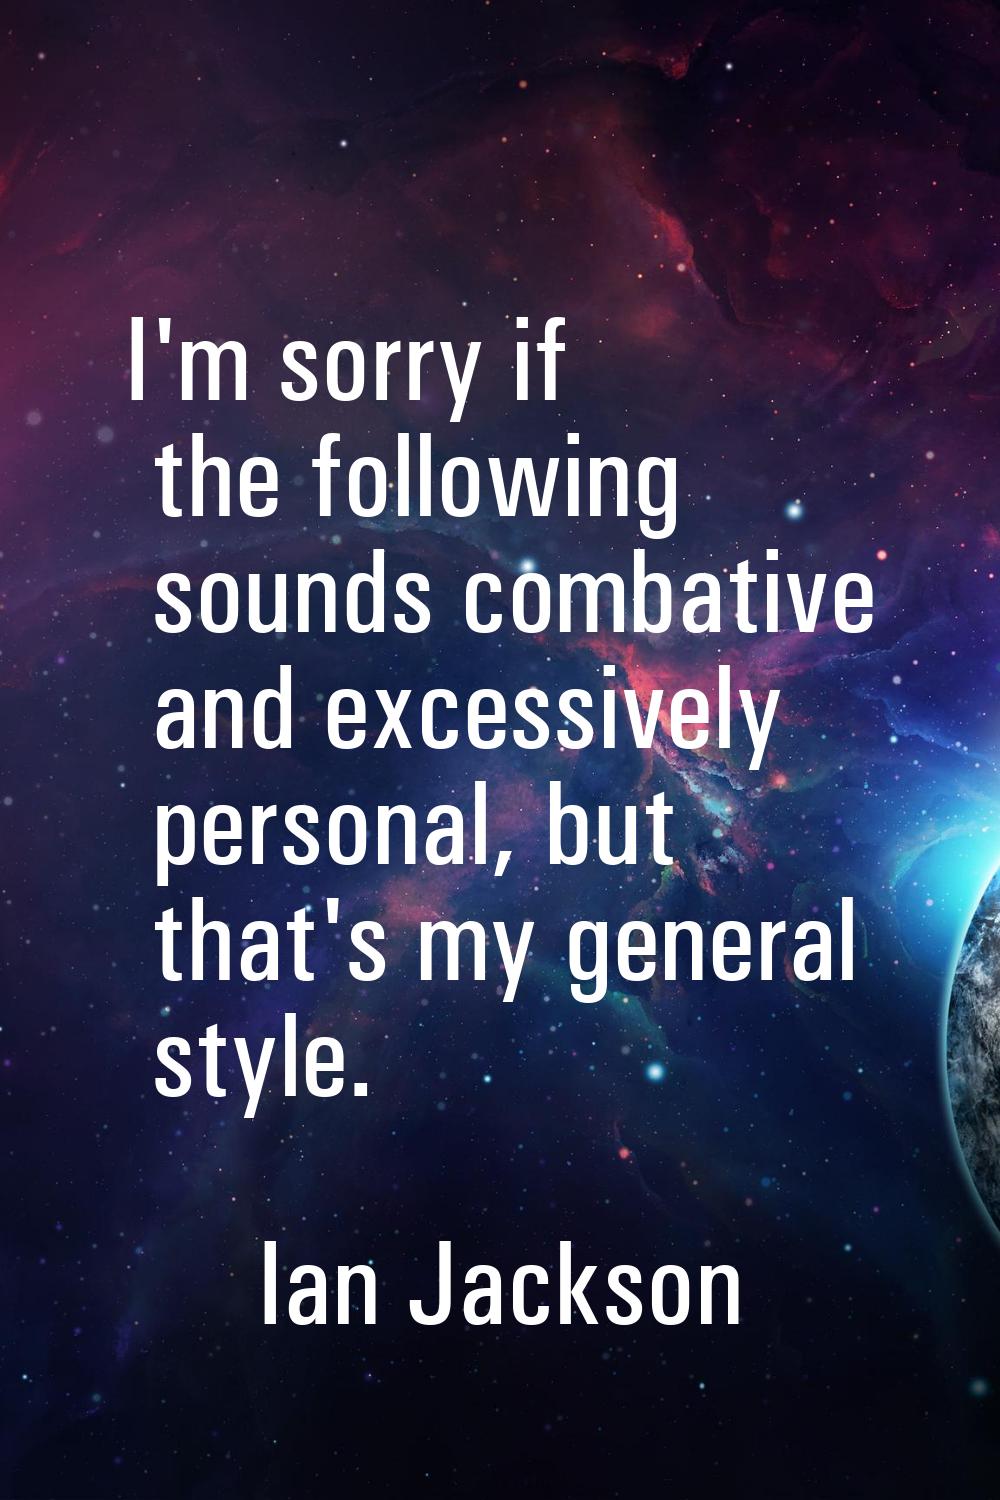 I'm sorry if the following sounds combative and excessively personal, but that's my general style.